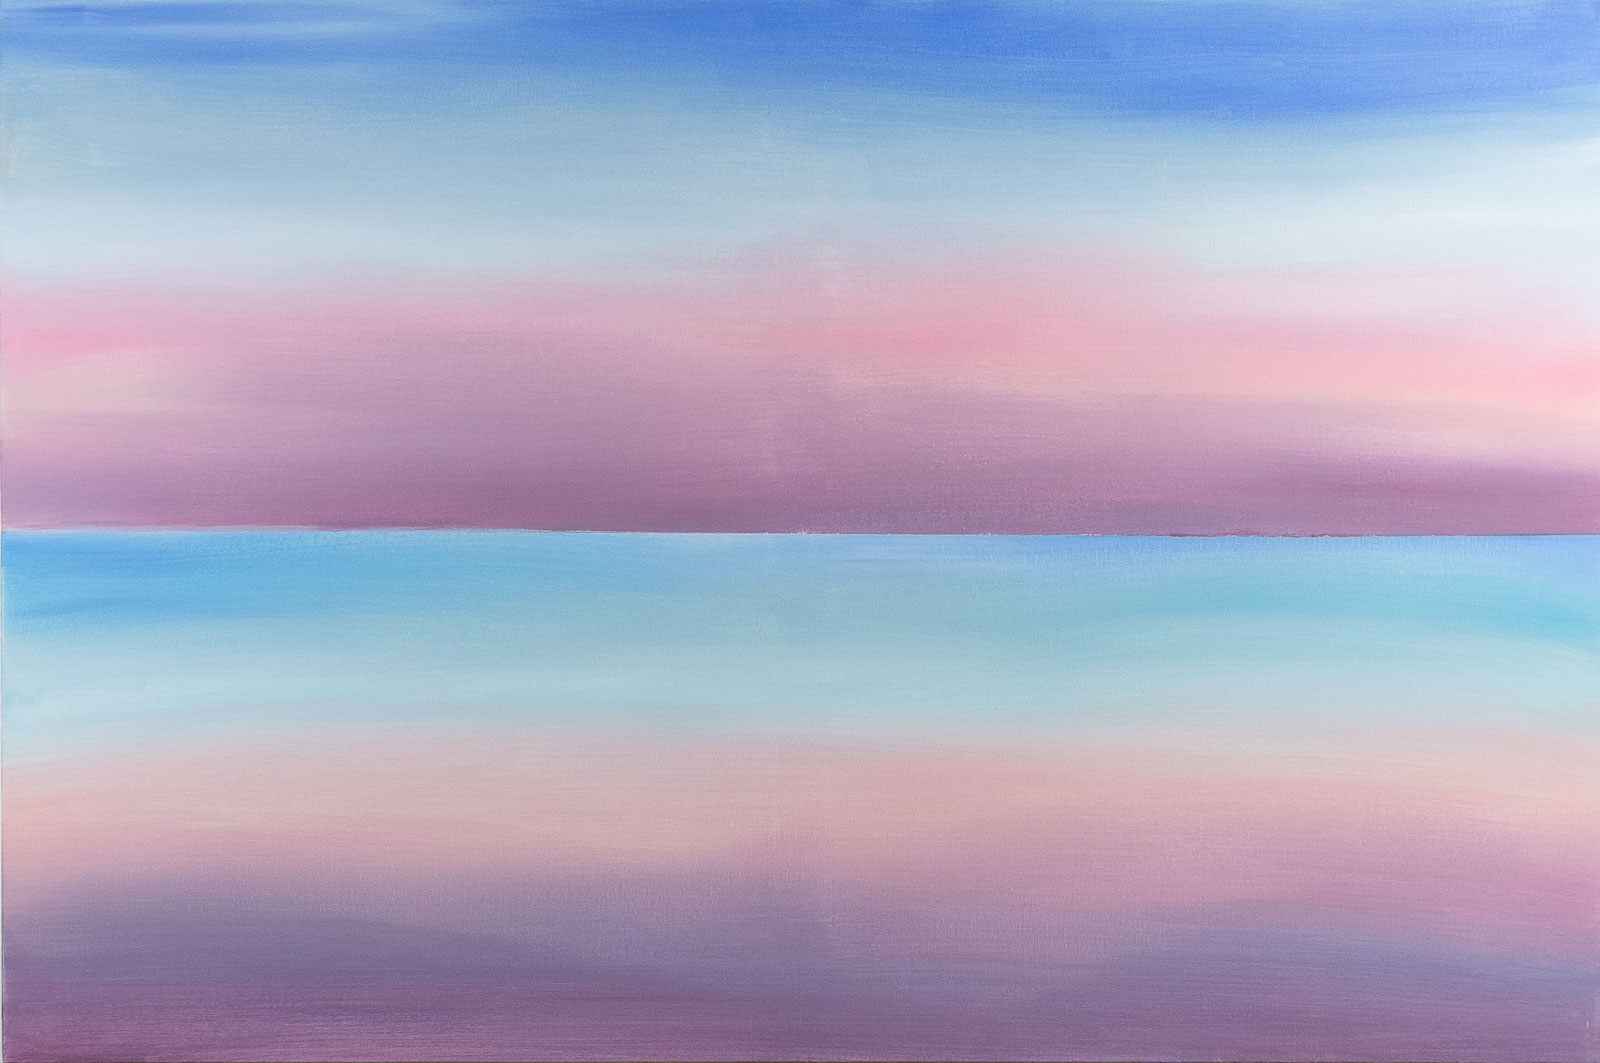 DOUBLE SKY PINK AND VIOLET - Acrylic on canvas - Format 80x120